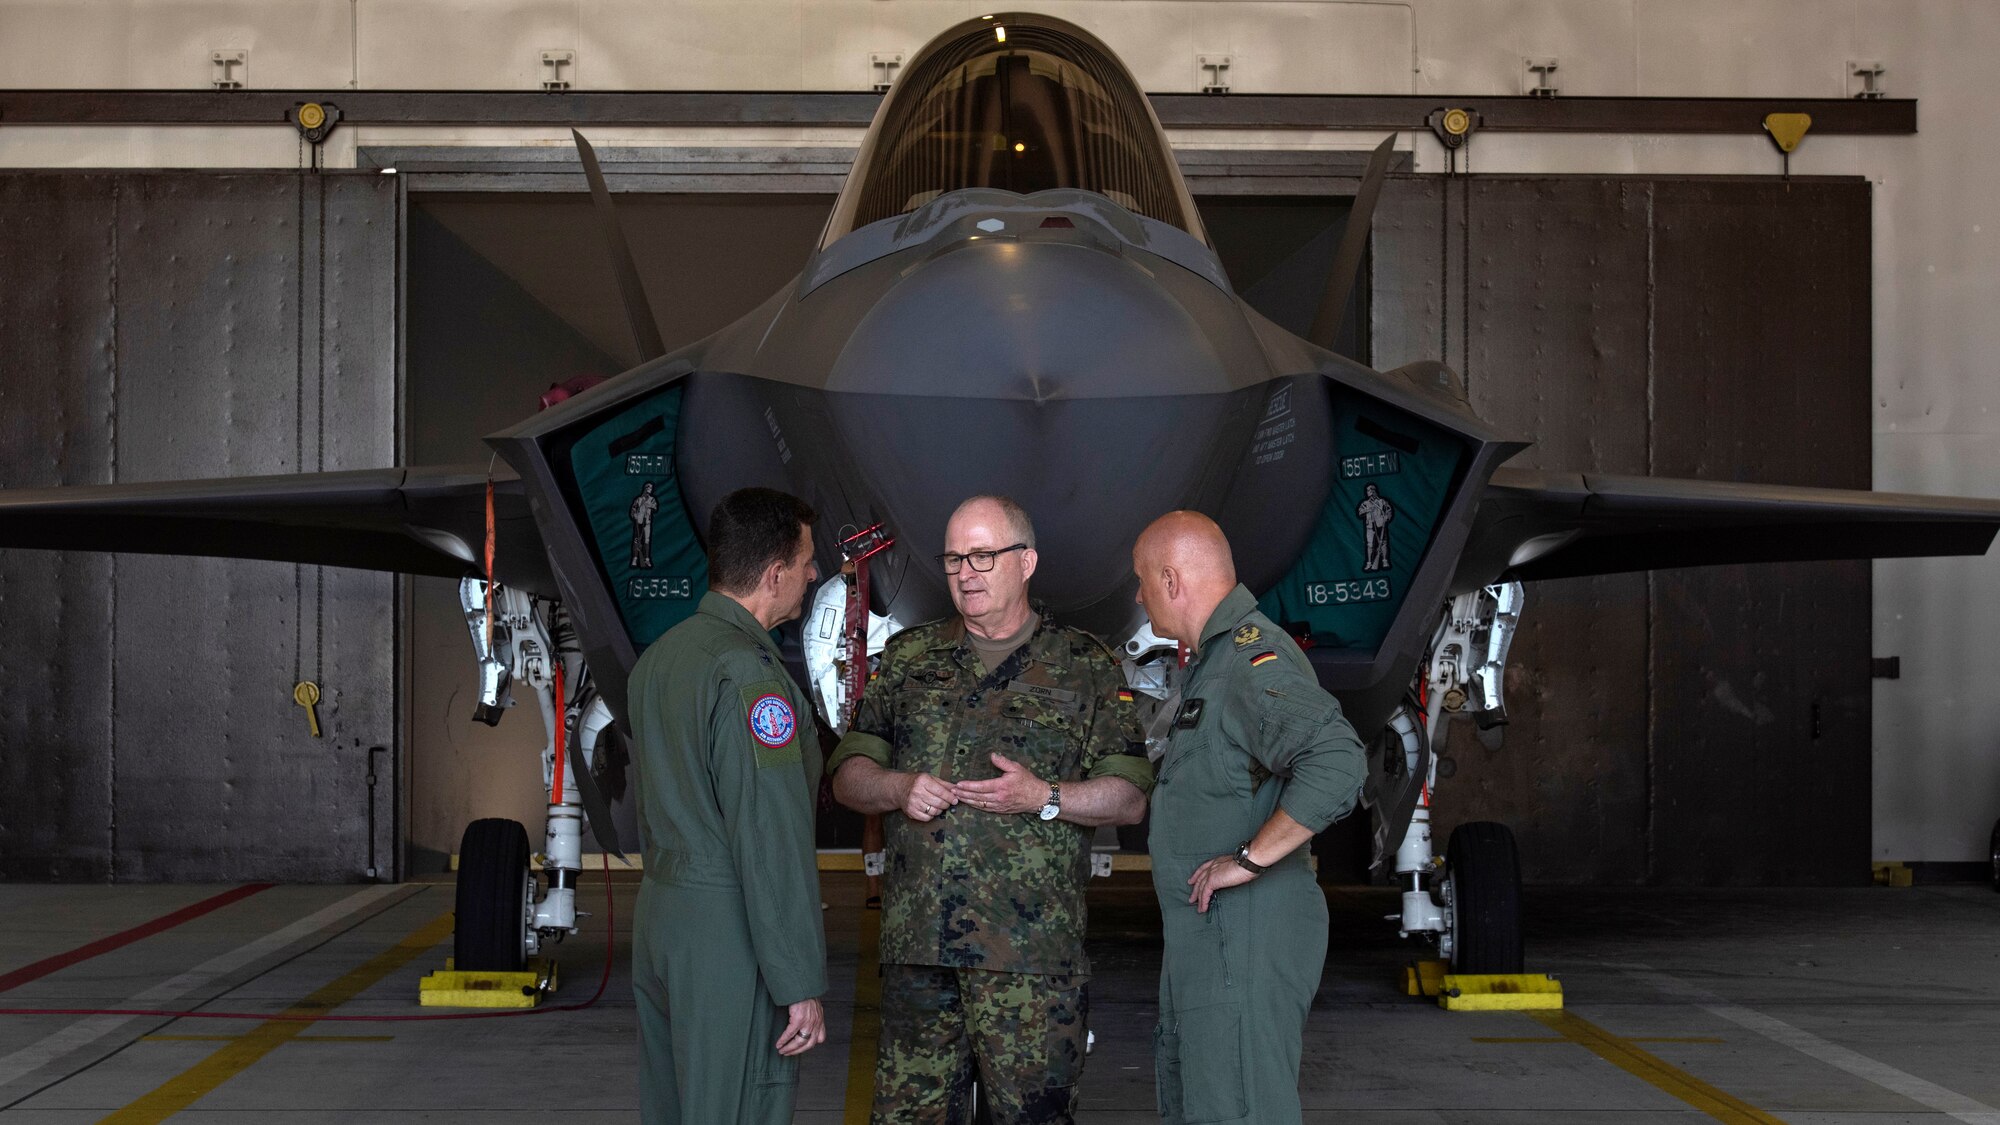 German Gen. Eberhard Zorn, Chief of Defense (center) speaks with U.S. Air Force Lt. Gen. Michael Loh, director, Air National Guard (left) and Lt. Gen. Ingo Gerhartz, chief of the German air force, in front of an F-35A Lightning II fifth generation fighter aircraft assigned to the 315th Fighter Squadron at Spangdahlem Air Base, Germany, July 19, 2022. As Germany's highest-ranking soldier, the Chief of Defense is responsible for the overall military defense concept and he has full command of the armed forces. The 52nd FW works regularly with their NATO partners to strengthen bonds, secure common interests and promote shared values.  (U.S. Air Force photo by Tech. Sgt. Anthony Plyler.)